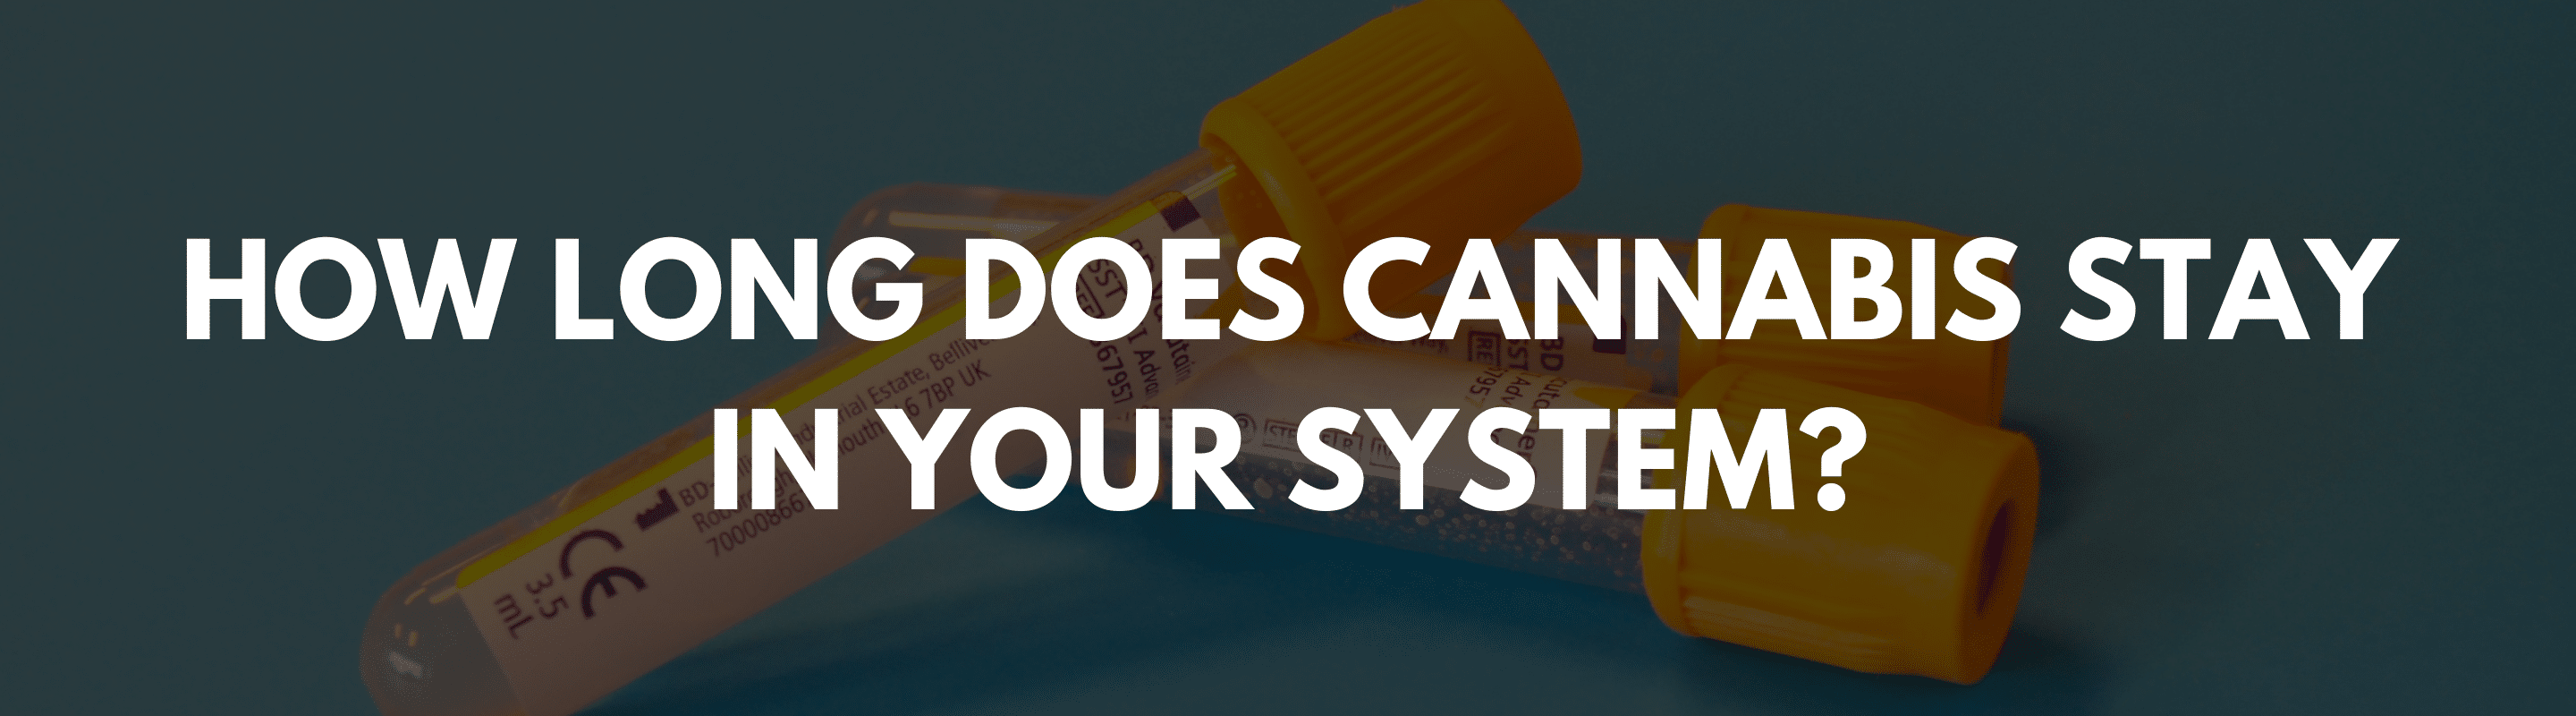 HOW LONG DOES CANNABIS STAY IN YOUR SYSTEM